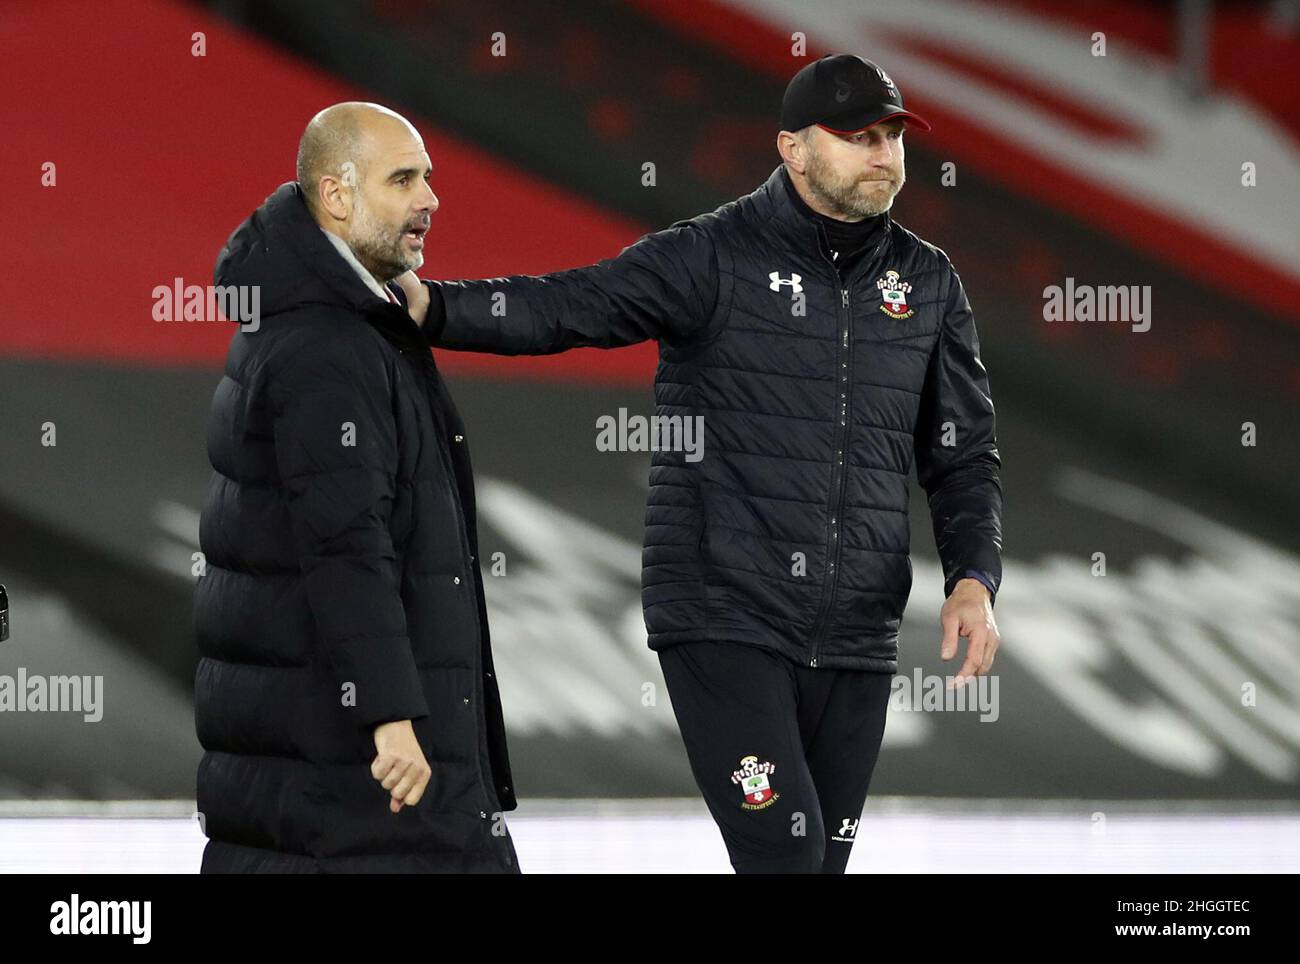 File photo dated 19-12-2020 of Southampton manager Ralph Hasenhuttl and Manchester City manager Pep Guardiola. Southampton manager Ralph Hasenhuttl believes Manchester City already have the Premier League title in the bag ahead of their visit to St Mary's. Issue date: Friday January 21, 2022. Stock Photo